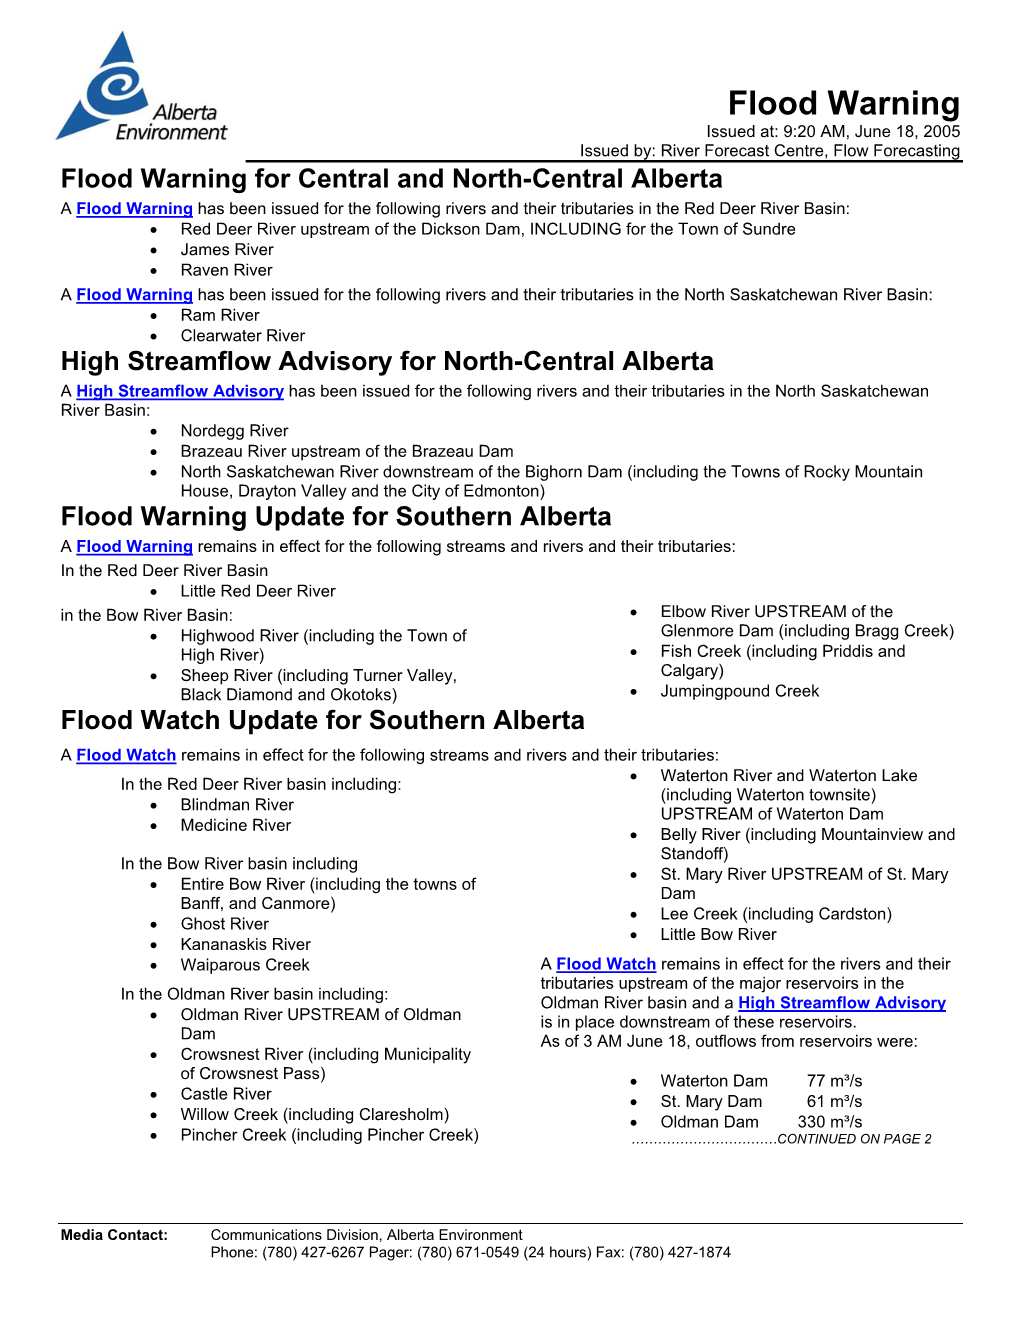 Flood Warning Update for Southern Alberta